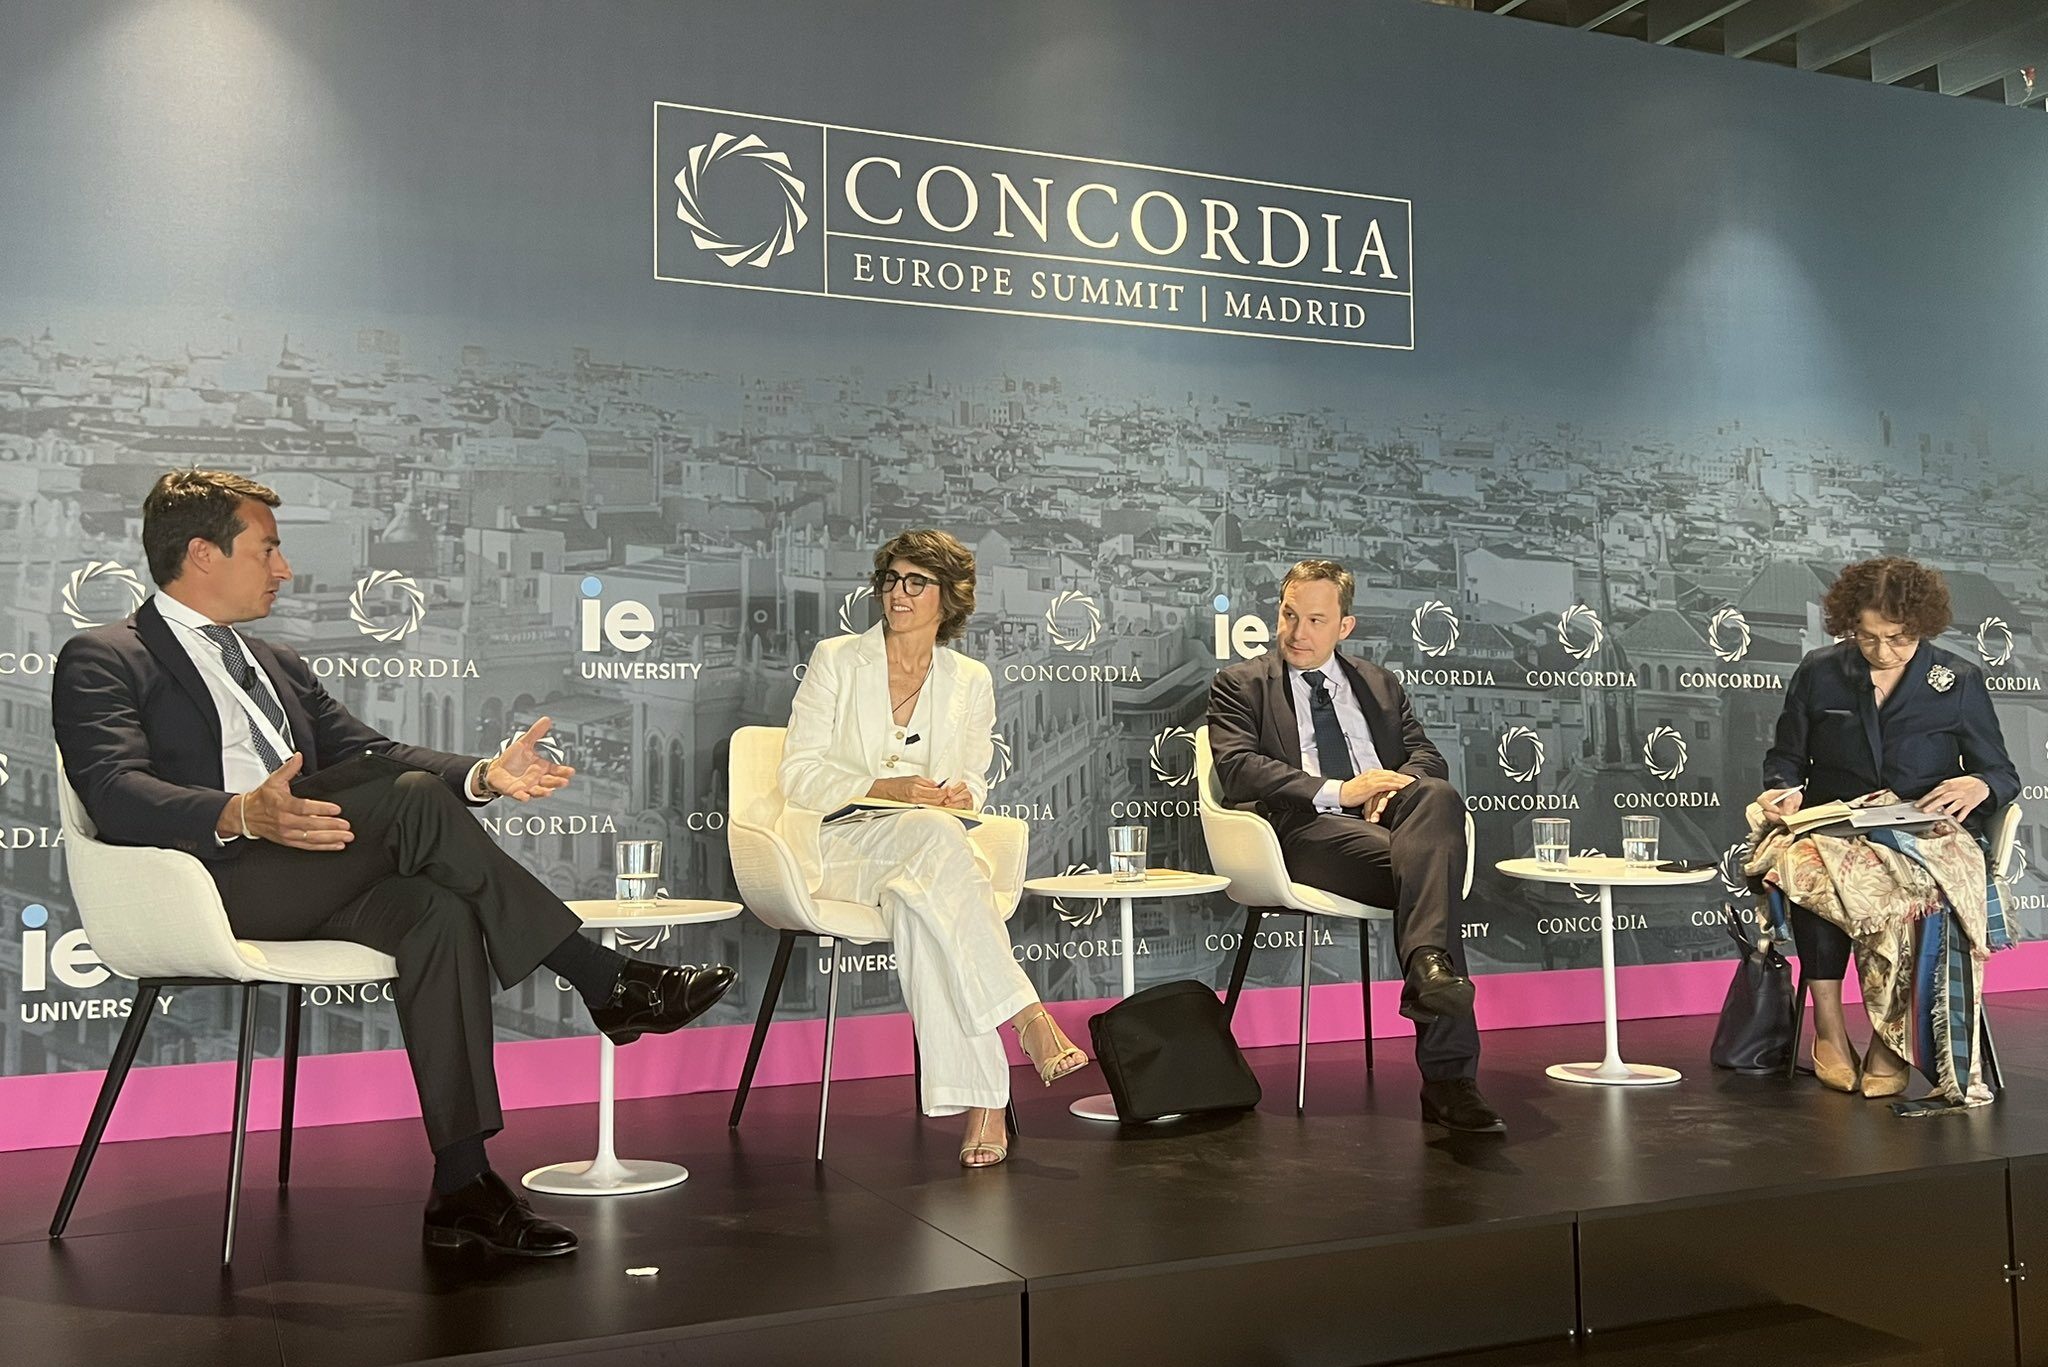 Concordia Summit: Our board member Raphael Schoentgen discusses Europe’s Energy Transition